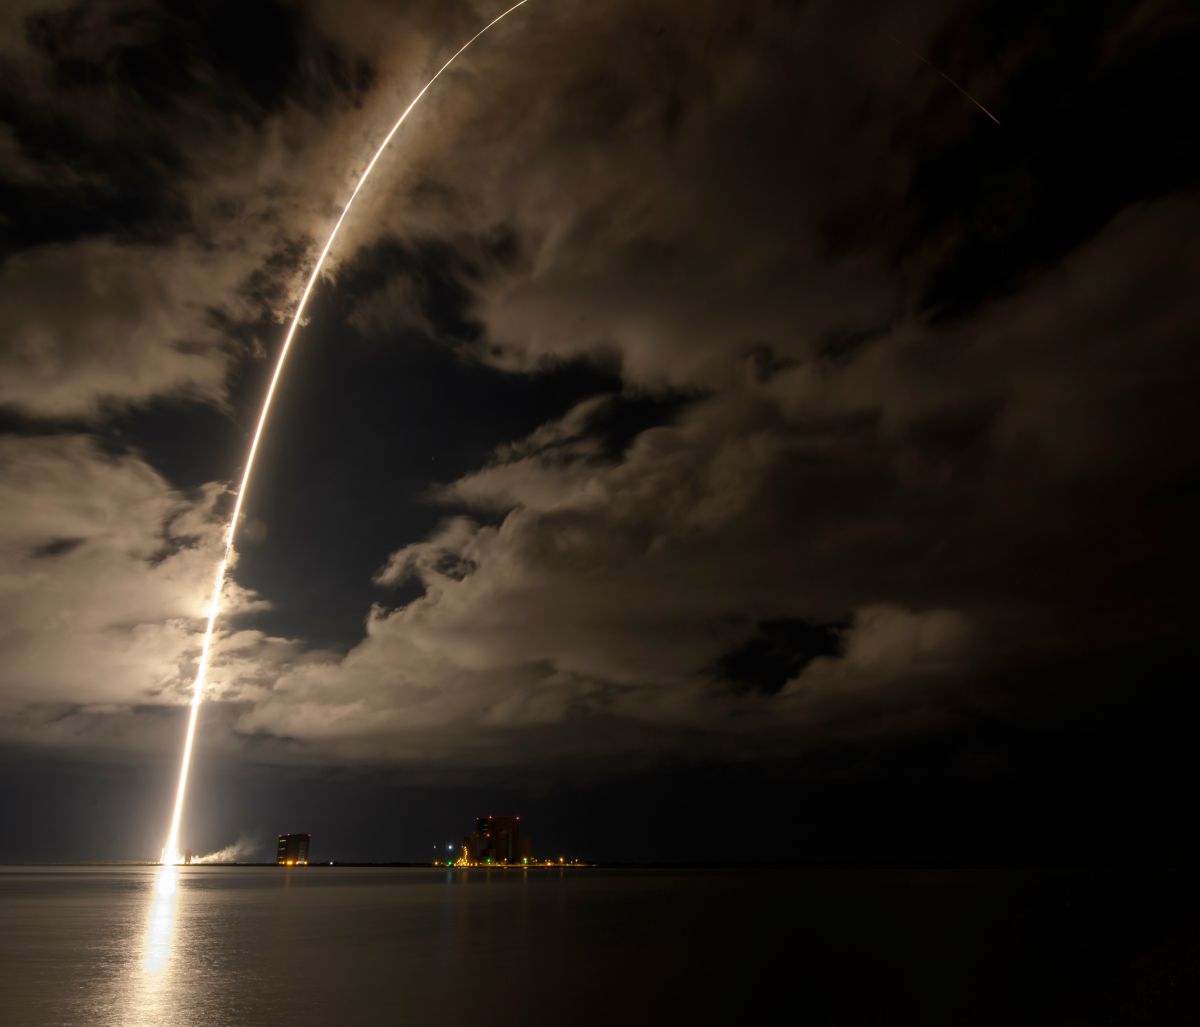 The United Alliance Atlas V rocket with the Lucy spacecraft lifted off on Saturday.